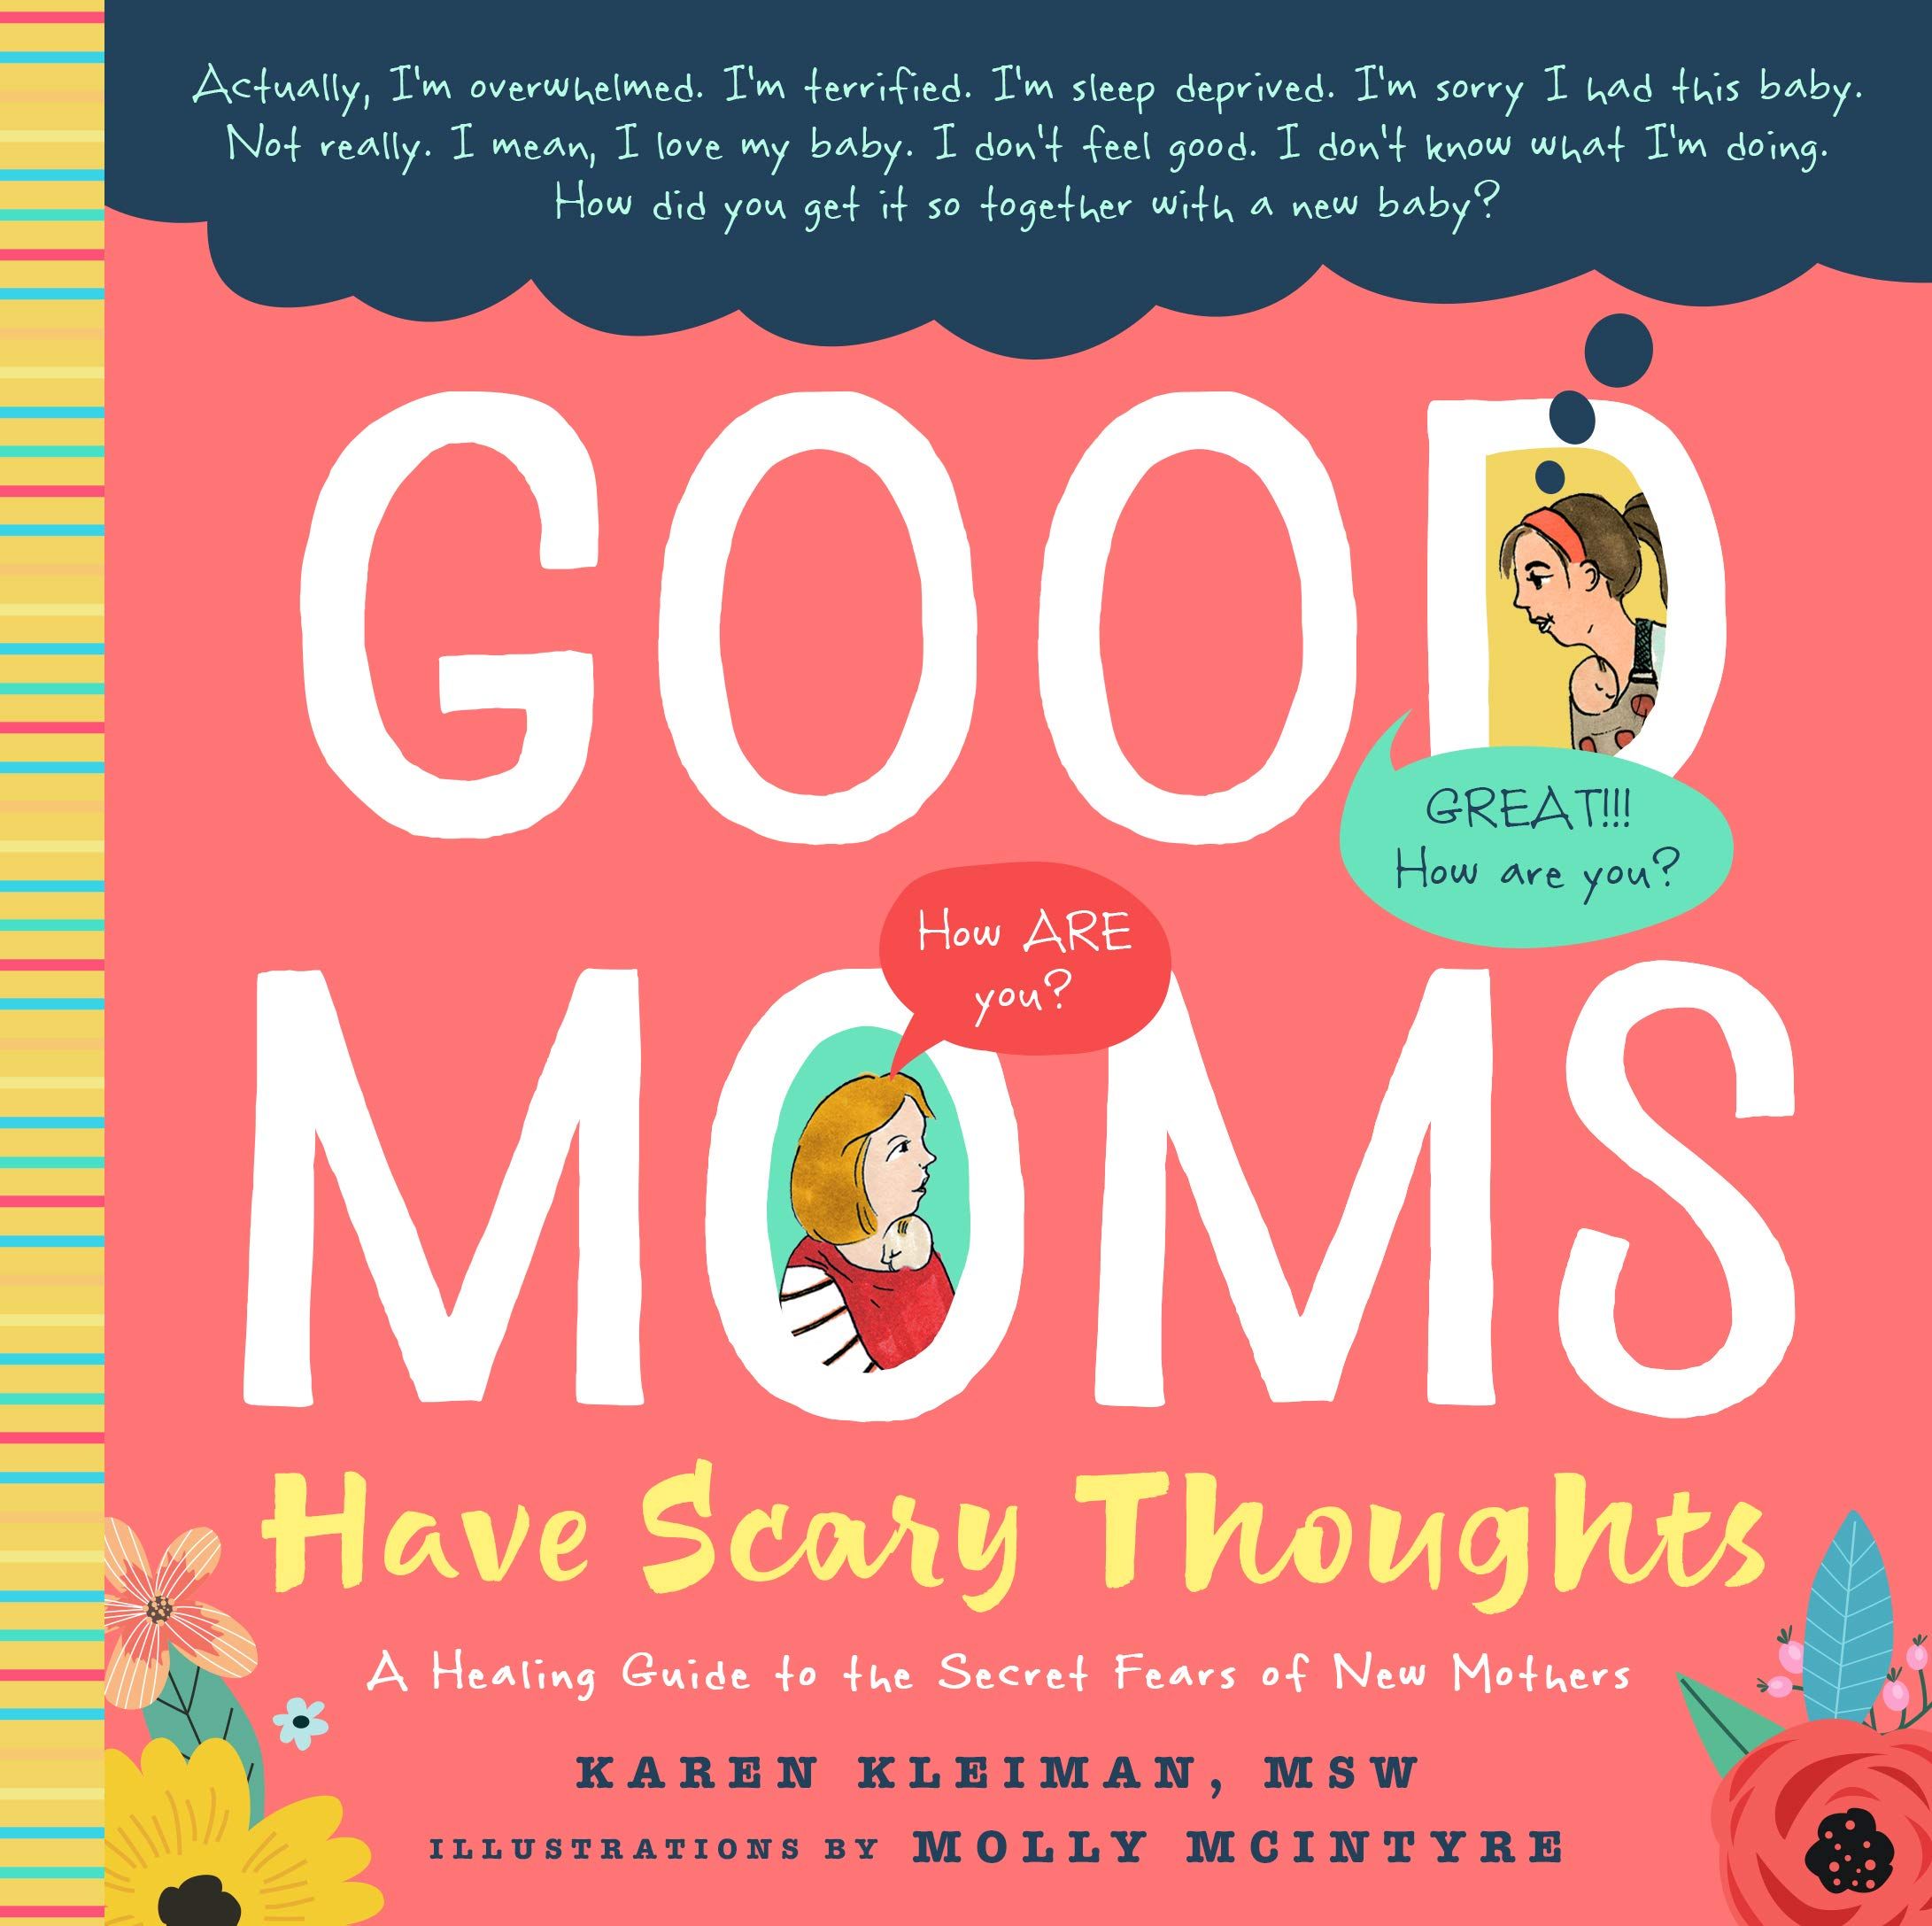 Good Moms Have Scary Thoughts: A Healing Guide to the Secret Fears